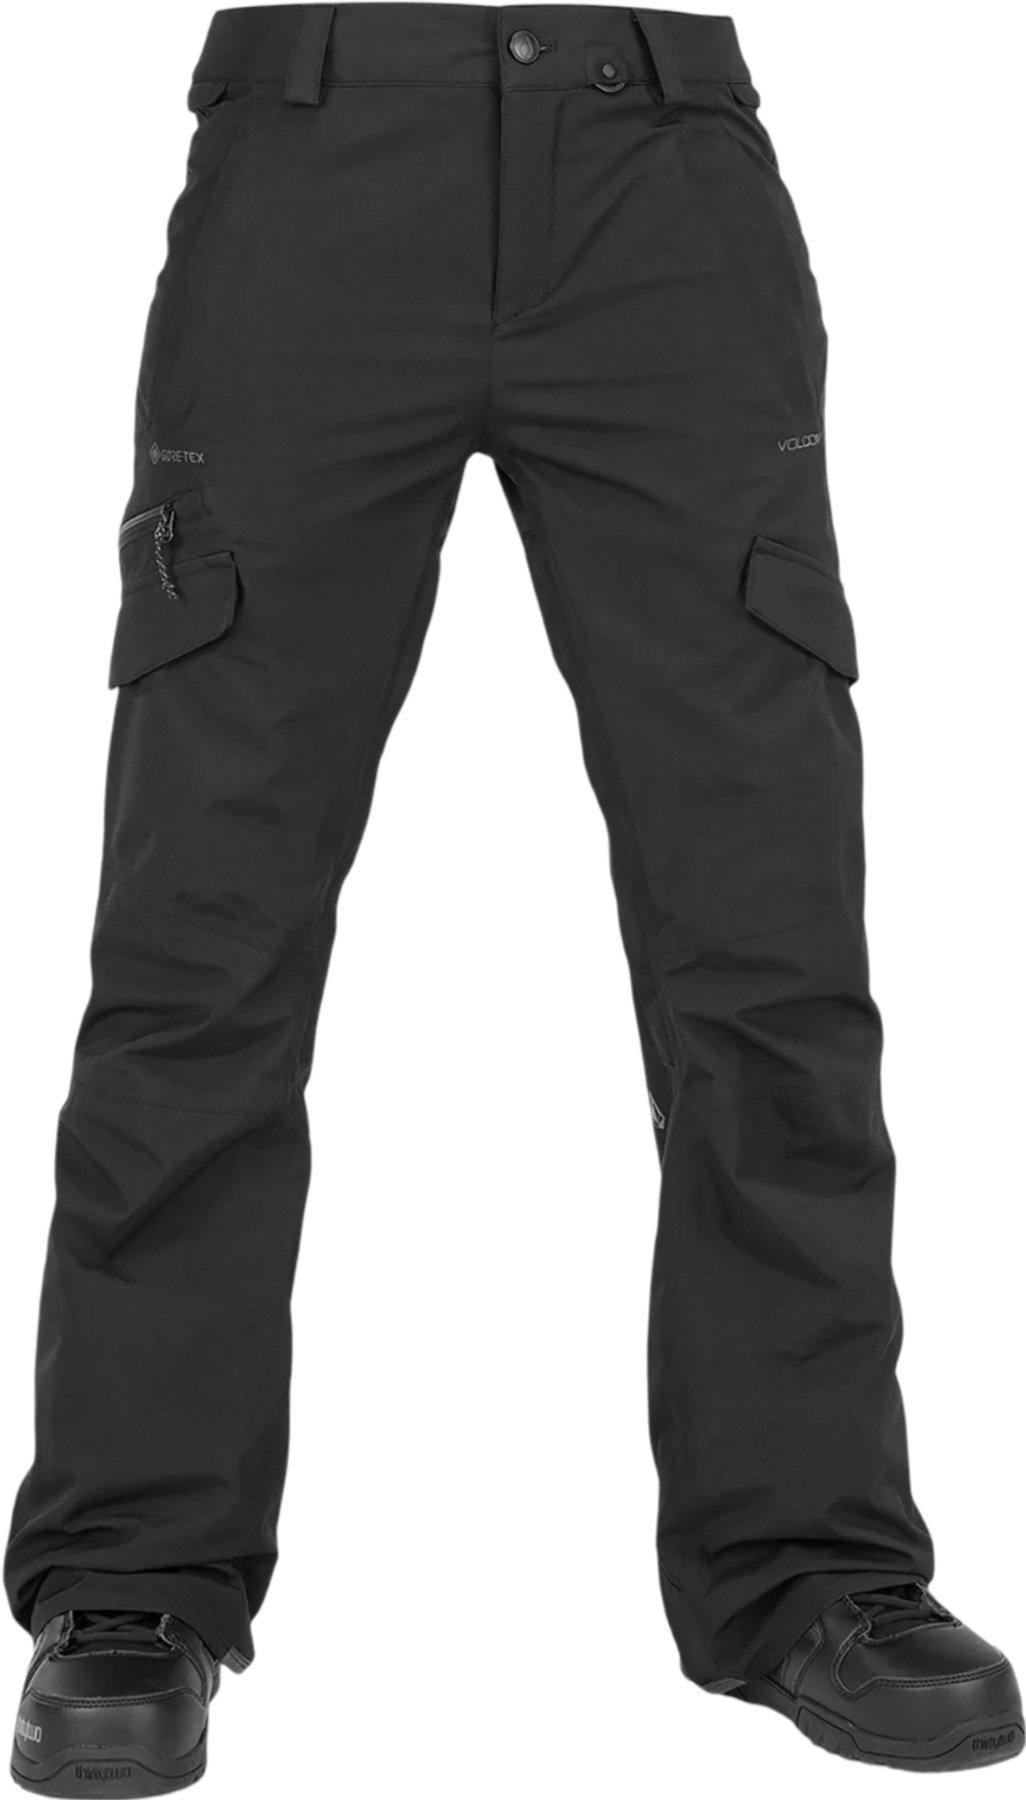 Product image for Aston GORE-TEX Trousers - Women's